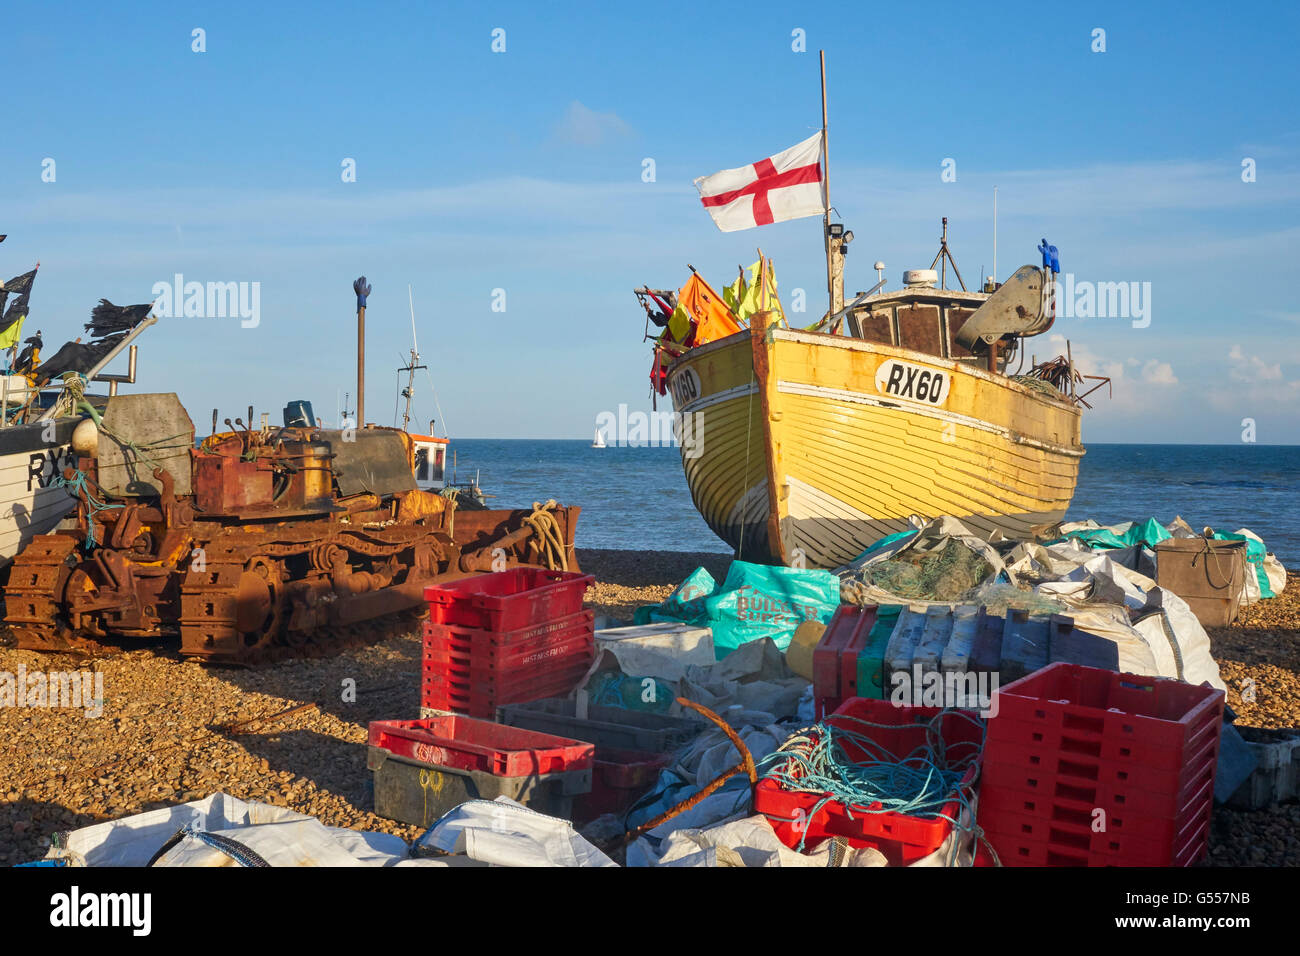 England, East Sussex, Hastings, Clinker Built Traditional Fishing